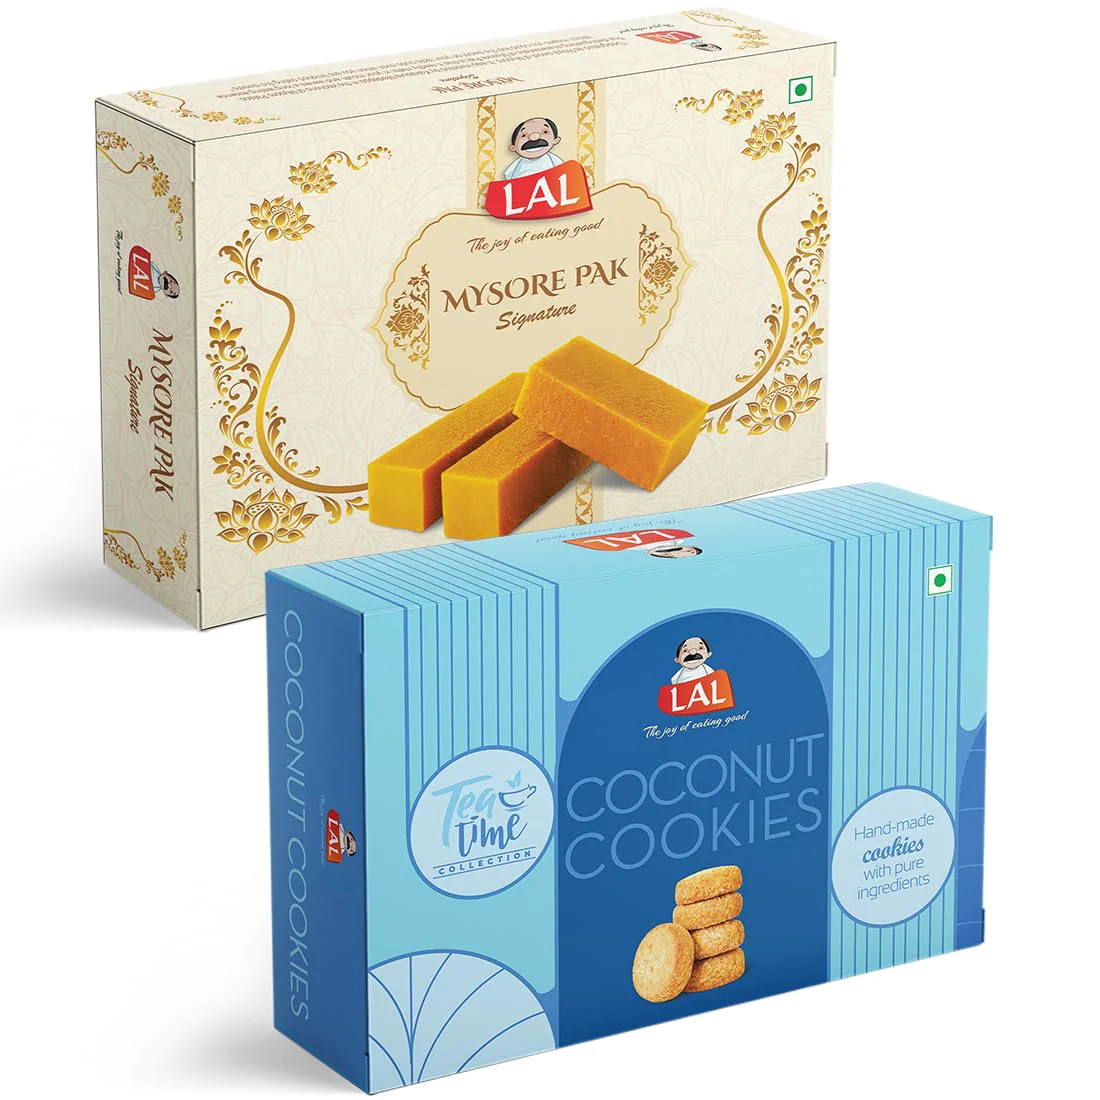 Lal sweets Mysore Pak 400g & Coconut Cookies 400g